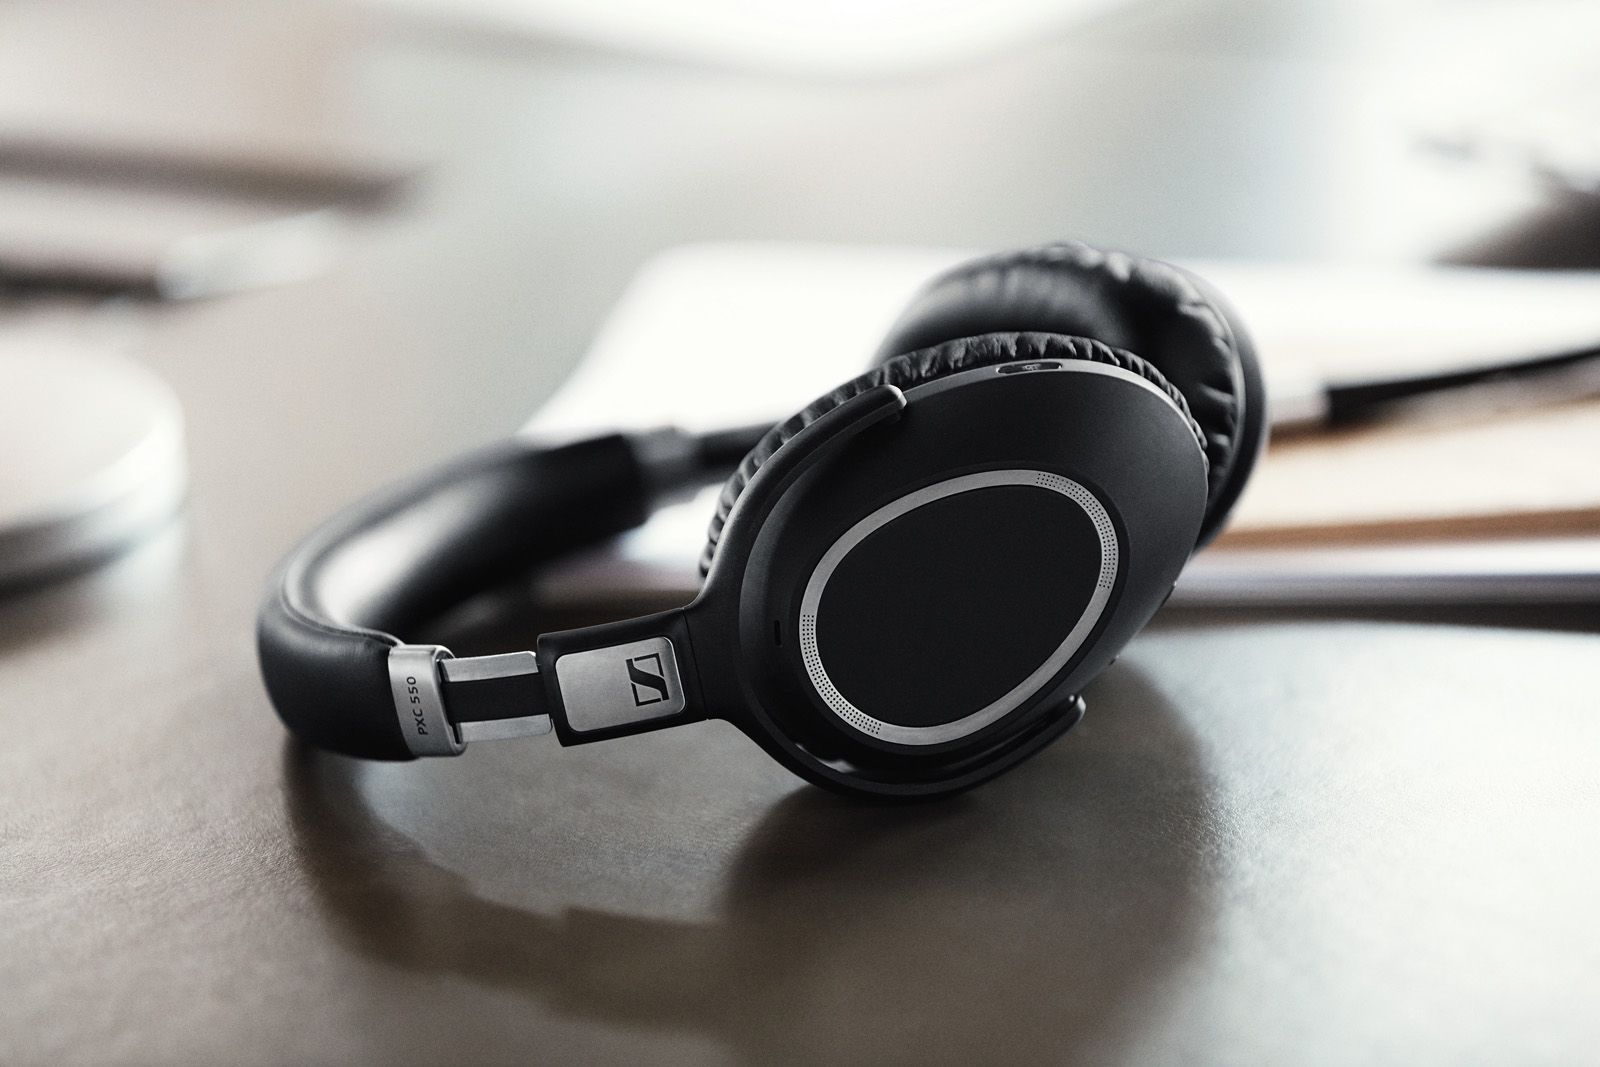 sennheiser pxc 550 wireless headphones take on bose qc 35 with noise cancellation and 30hrs battery image 1